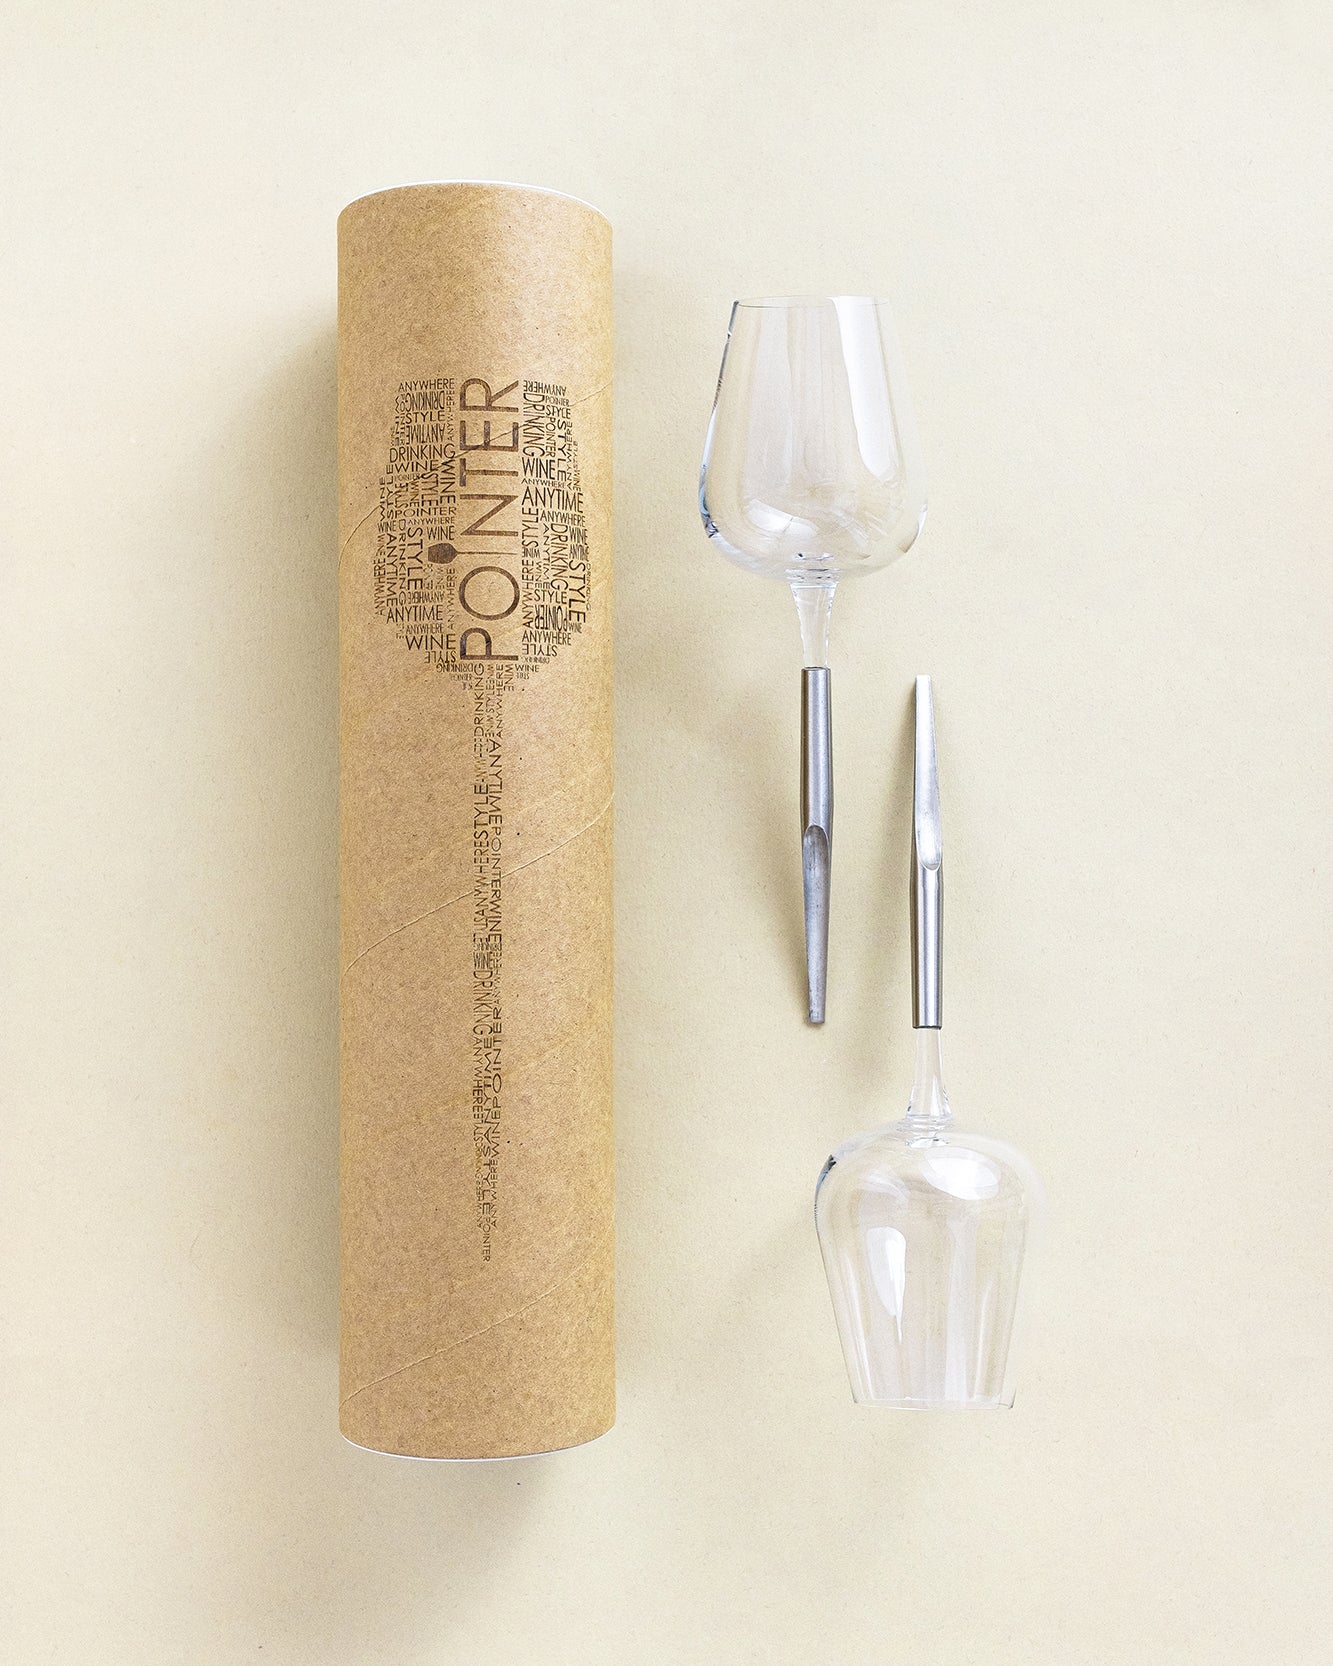 2 picnic wine glasses with metal pin placed horizontally next to their cardboard packing tube for transport